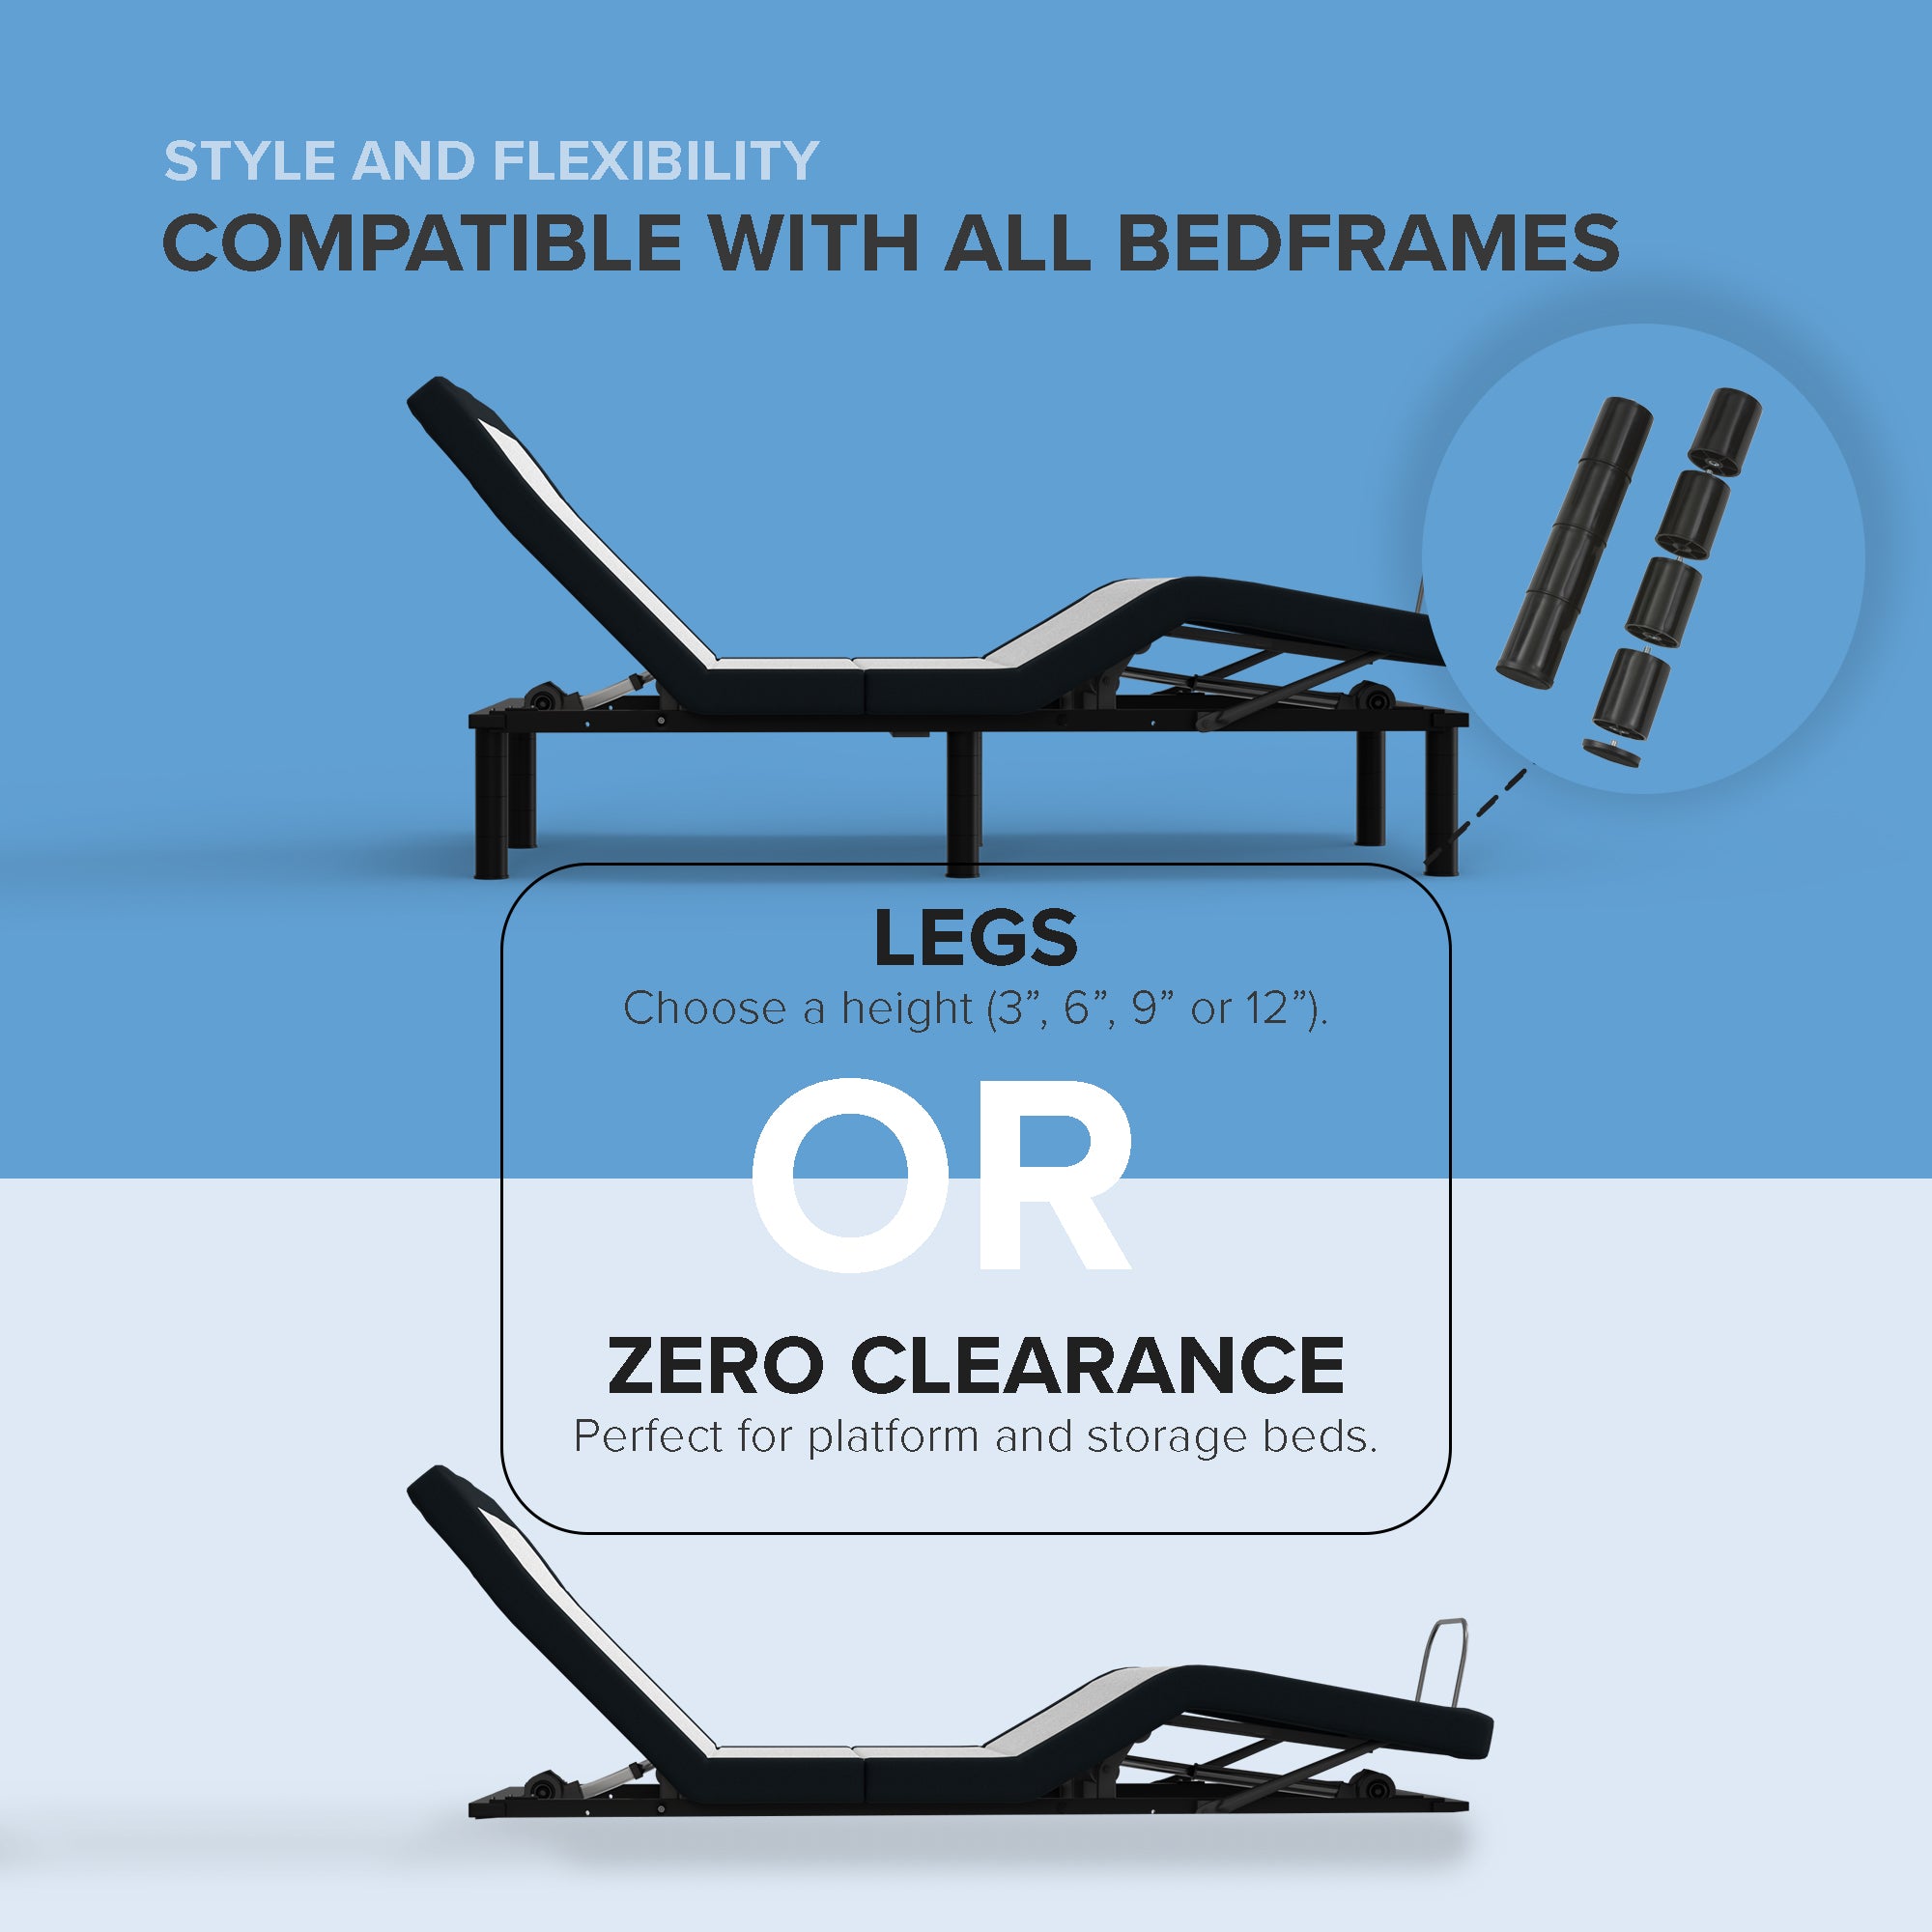 ZZZEN E3 ZERO CLEARANCE ADJUSTABLE BED FRAME WITH WIRLESS REMOTE